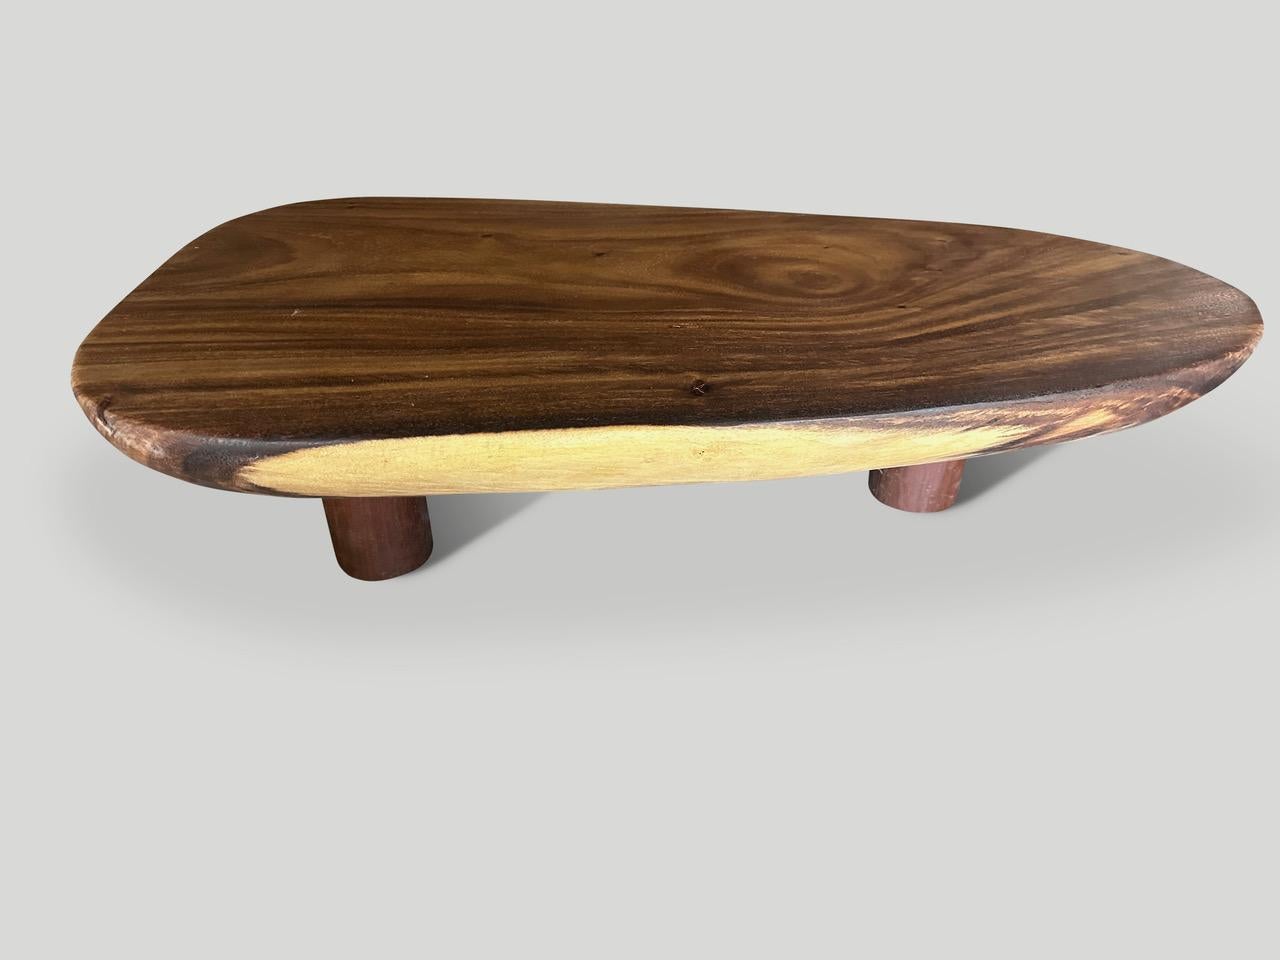 Andrianna Shamaris Minimalist Suar Wood Coffee Table  In Excellent Condition For Sale In New York, NY